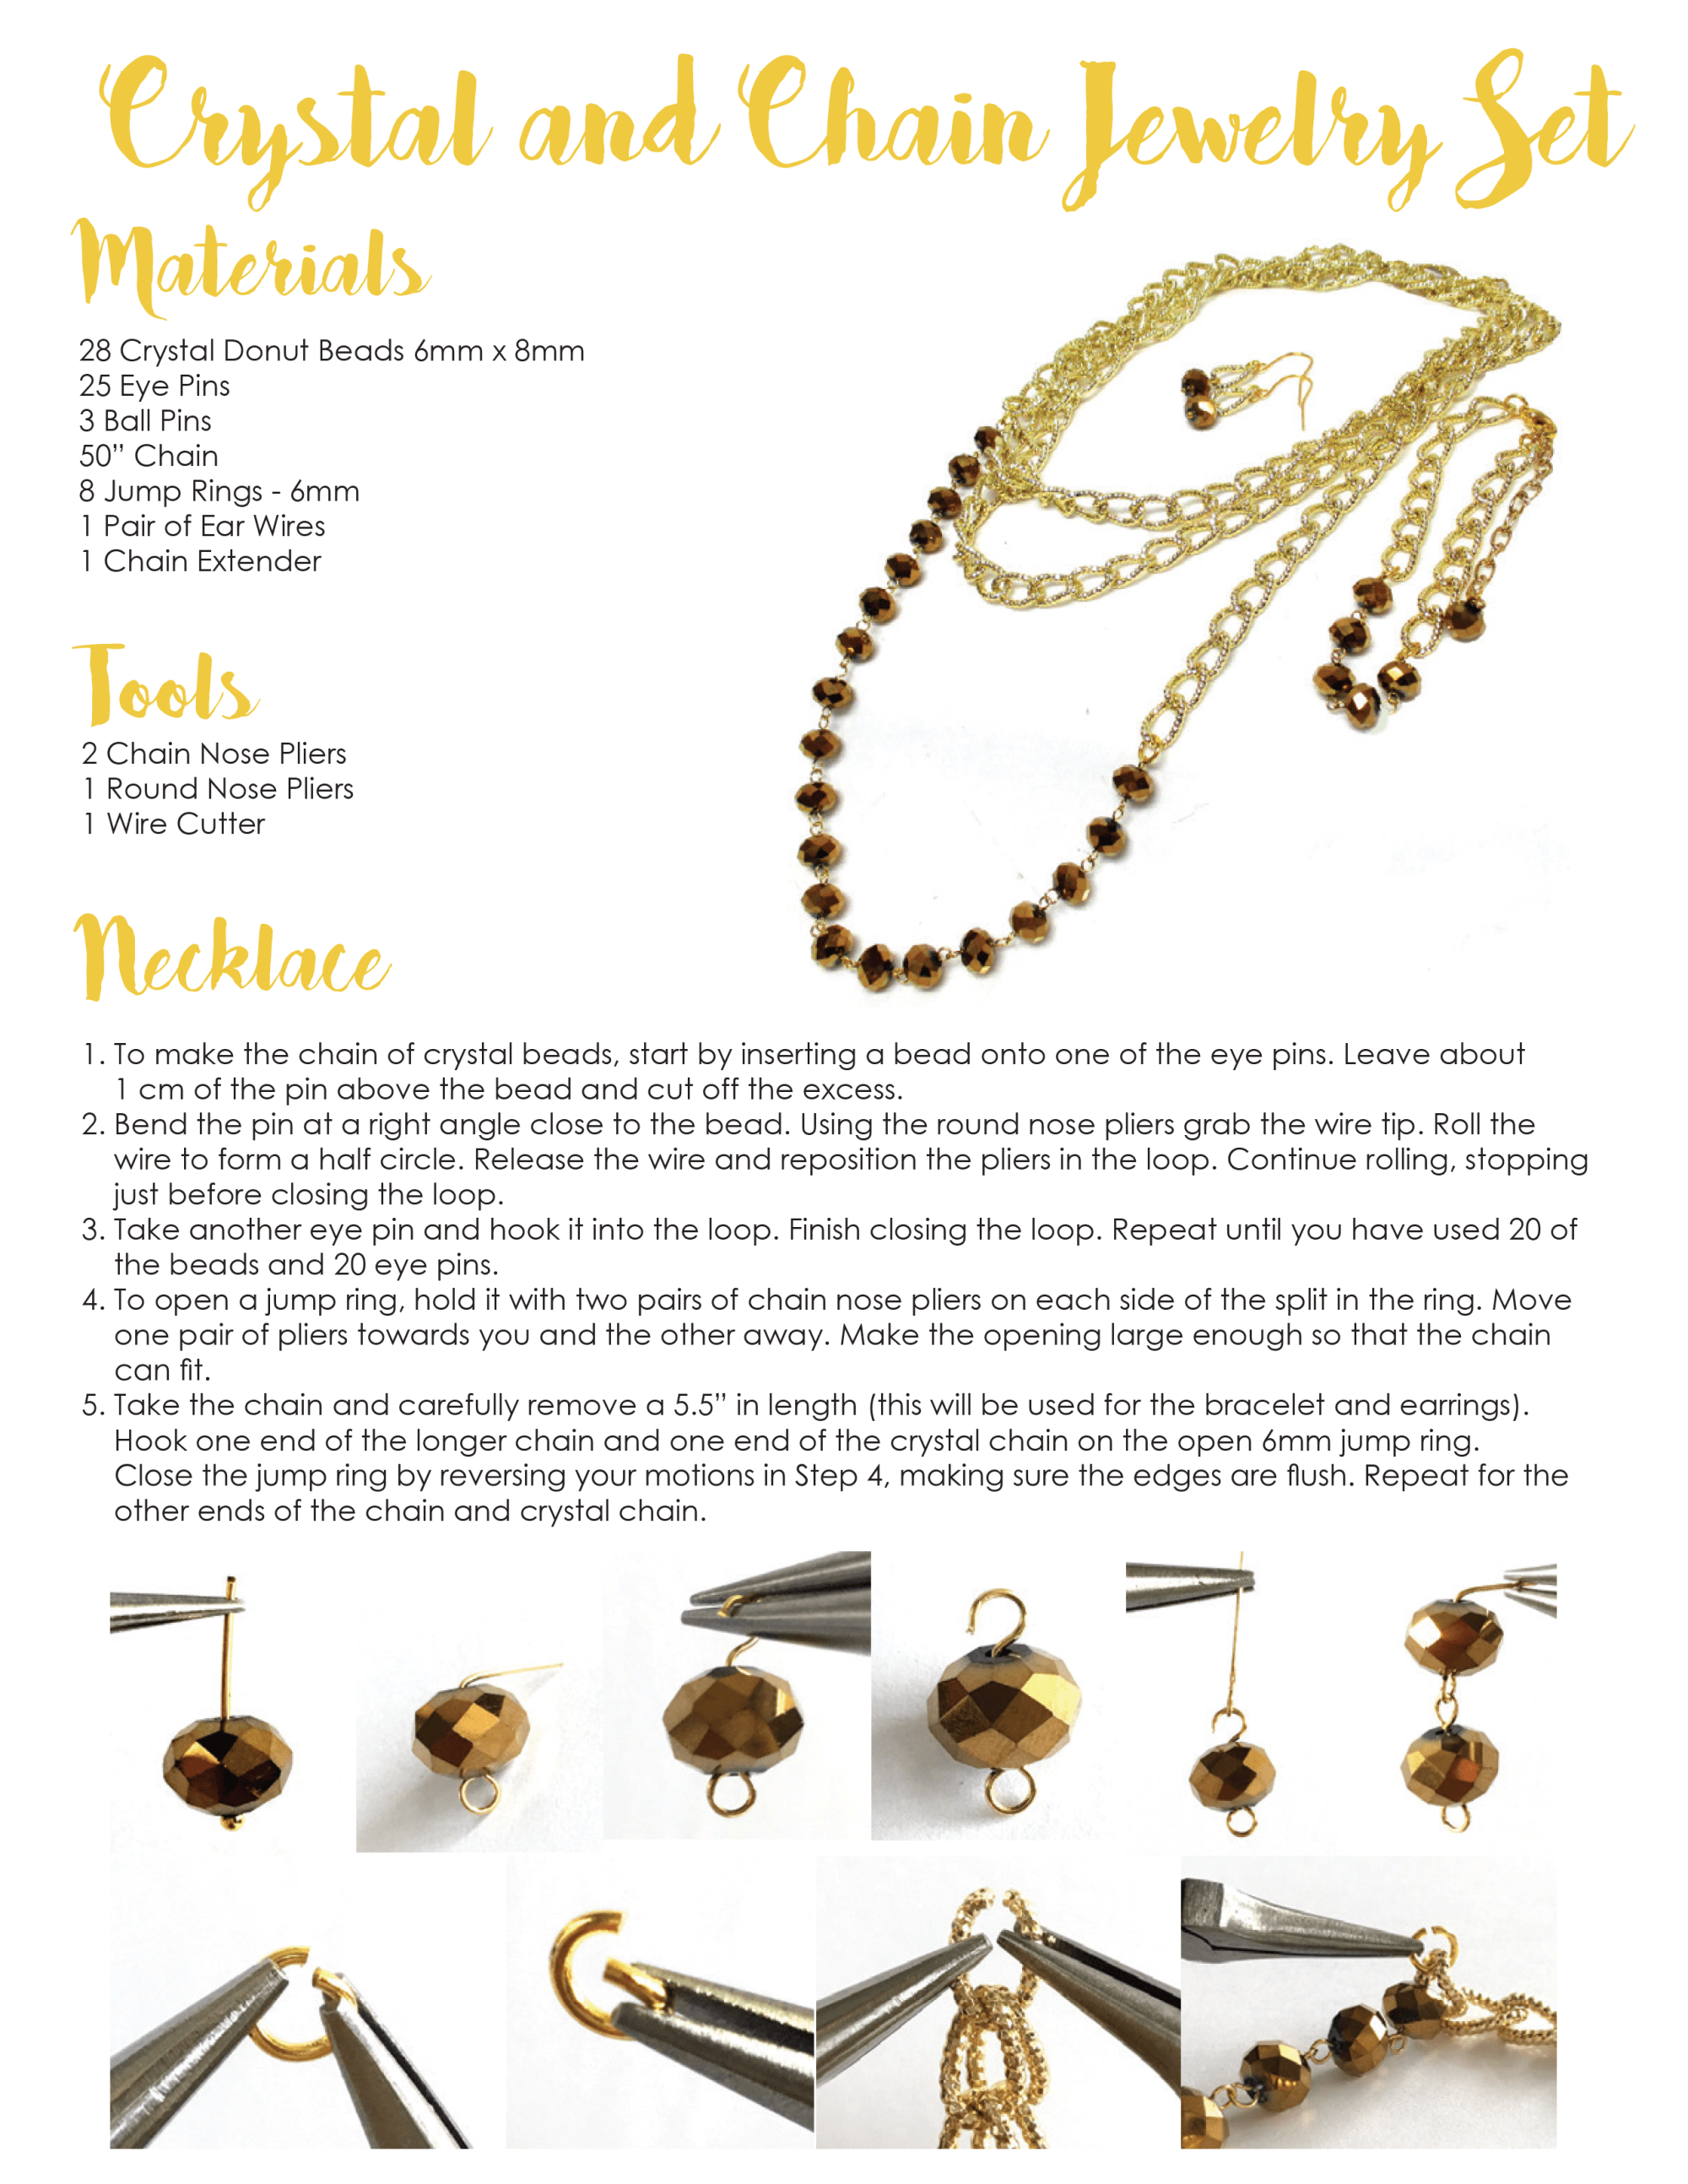 Materials & steps to create crystal & chain necklace